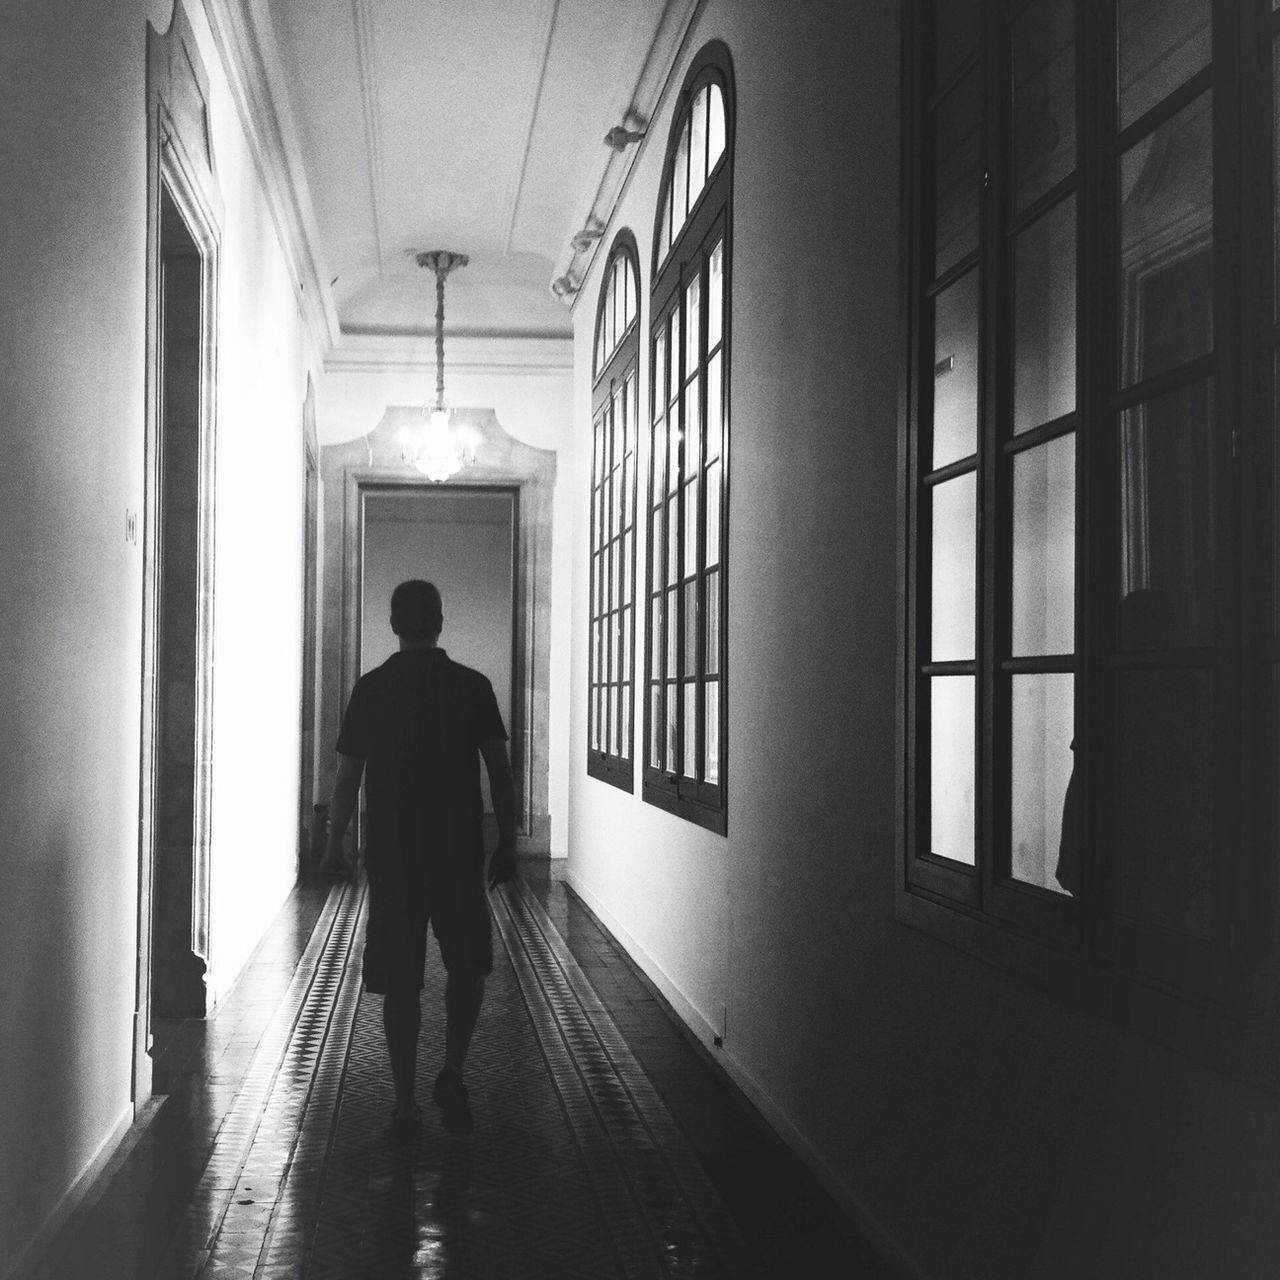 indoors, architecture, built structure, silhouette, full length, rear view, men, walking, lifestyles, standing, window, corridor, building, person, unrecognizable person, the way forward, reflection, arch